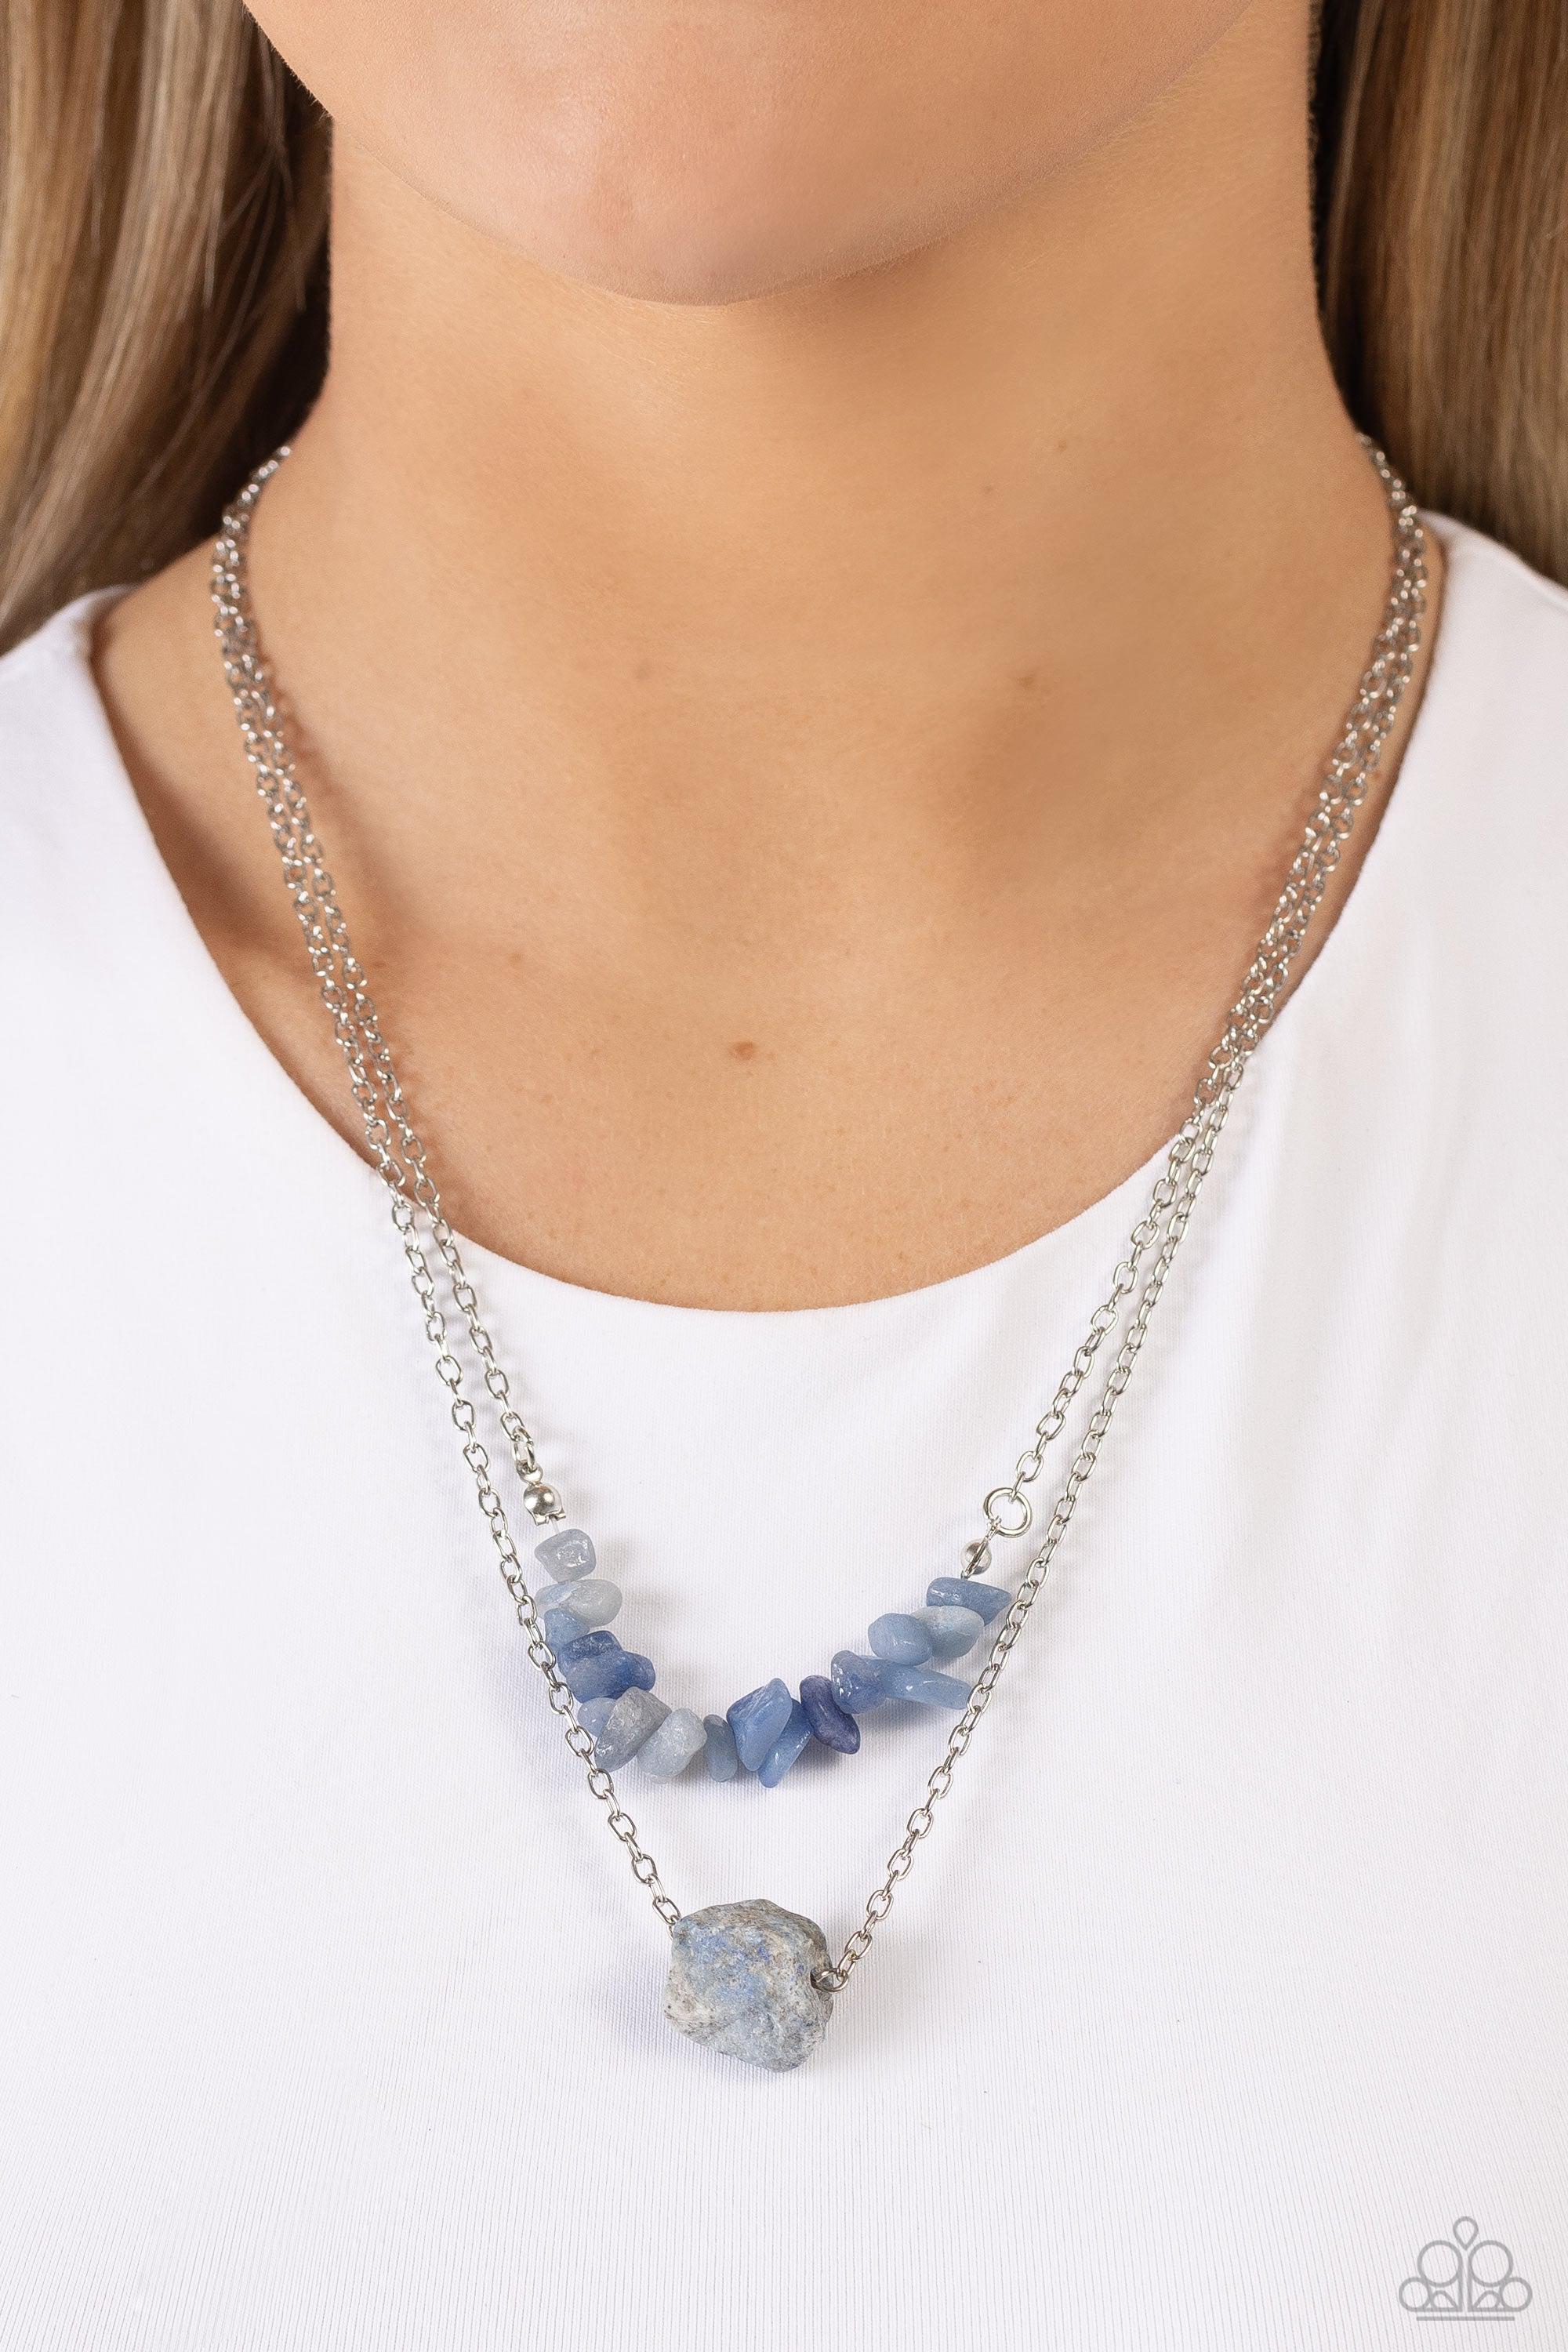 Chiseled Caliber Blue Lapis Stone Necklace - Paparazzi Accessories- lightbox - CarasShop.com - $5 Jewelry by Cara Jewels